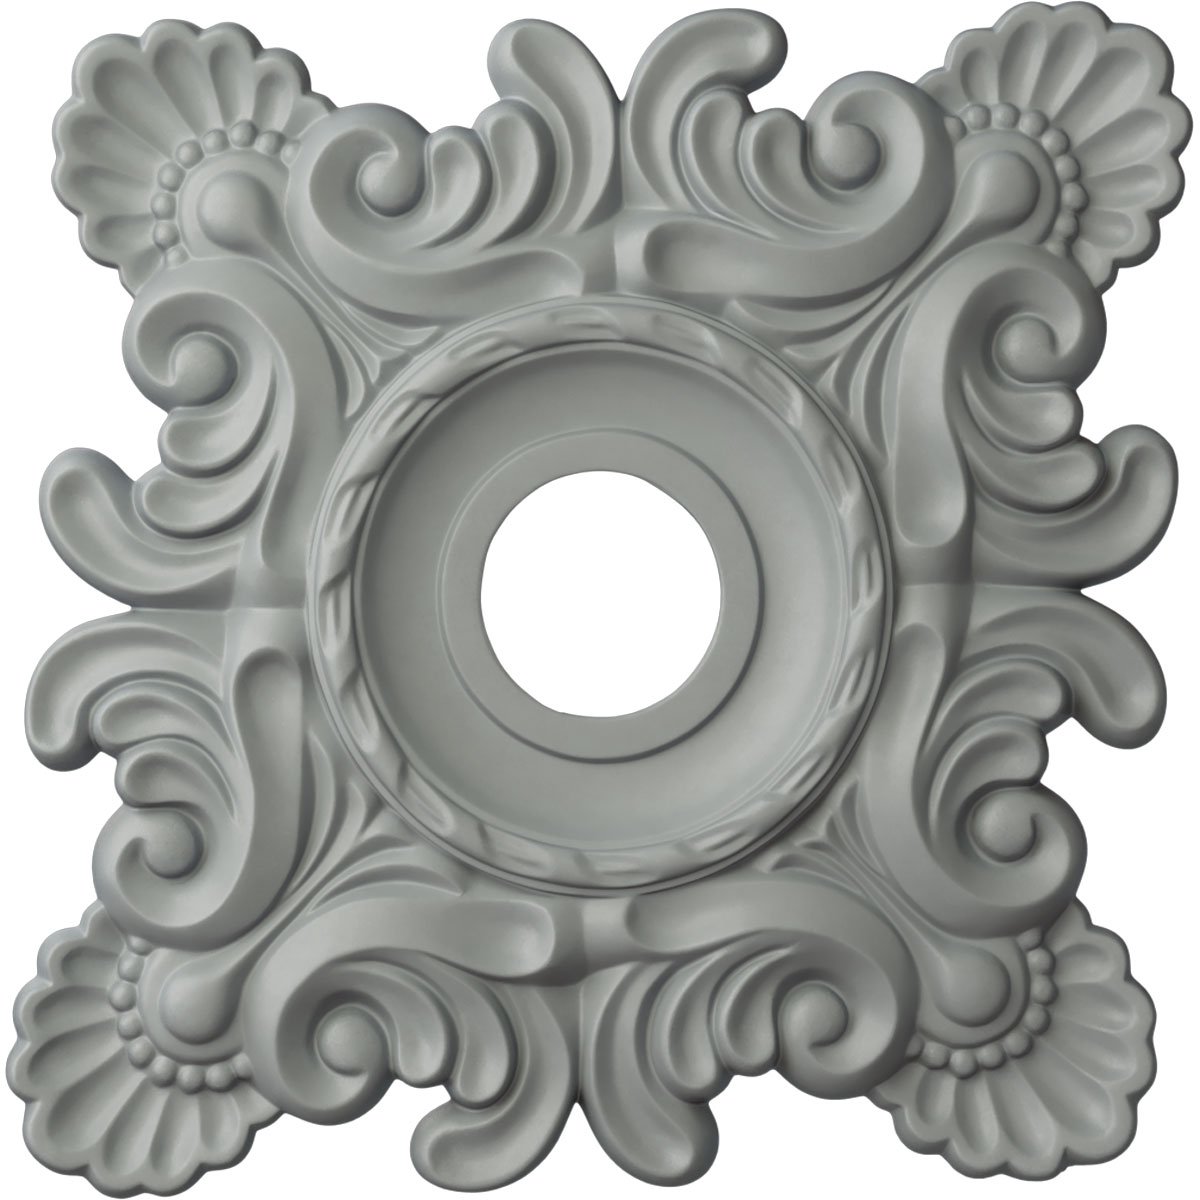 18-Inch W x 18-Inch H x 3 1/4-Inch ID x 1 1/2-Inch P Crawley Ceiling  Medallion (Fits Canopies up to 6 3/4-Inch )